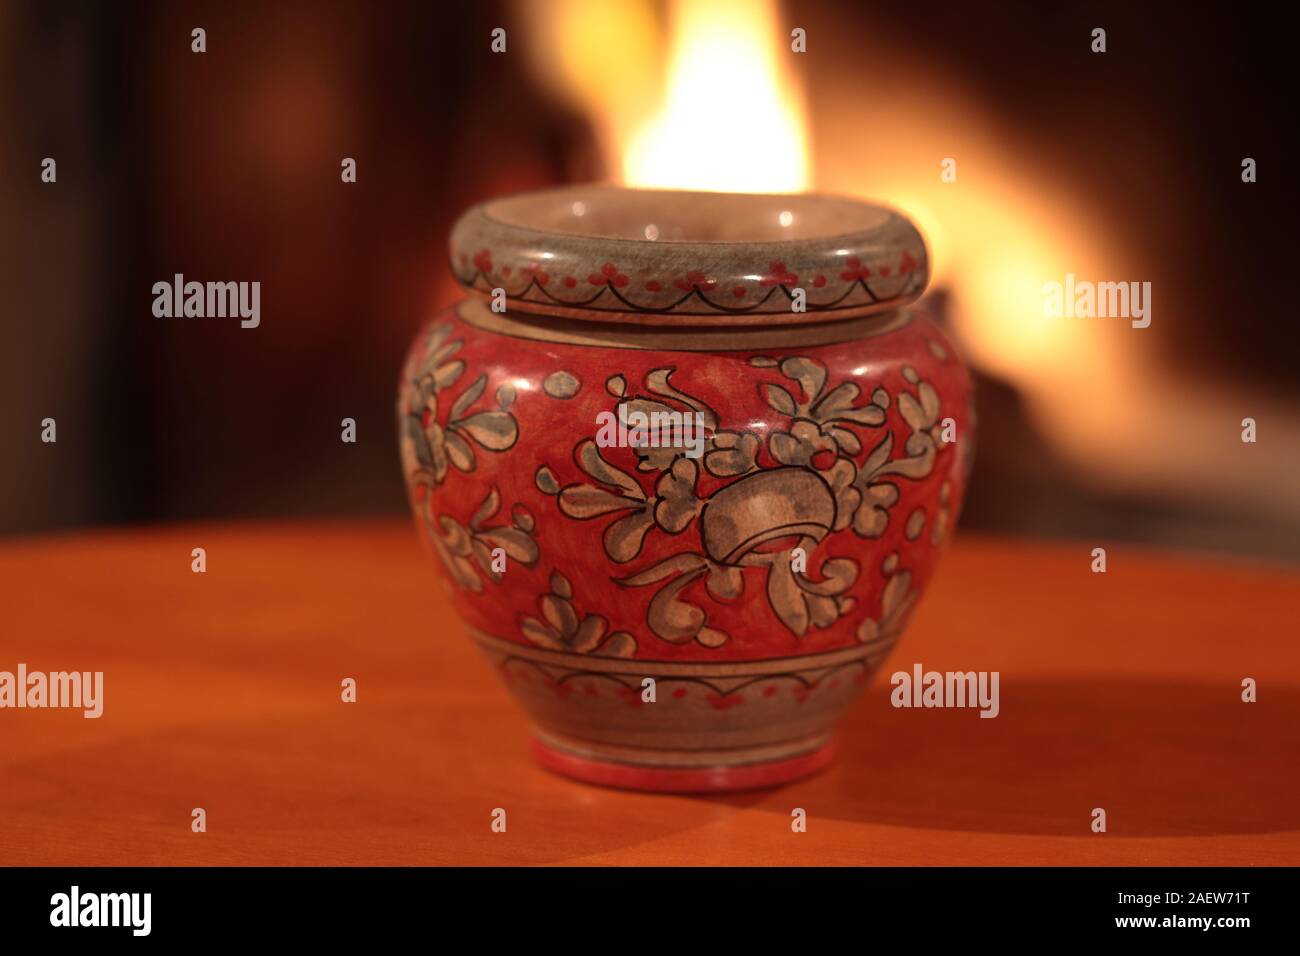 Red vase decorated with fireplace in the background Stock Photo